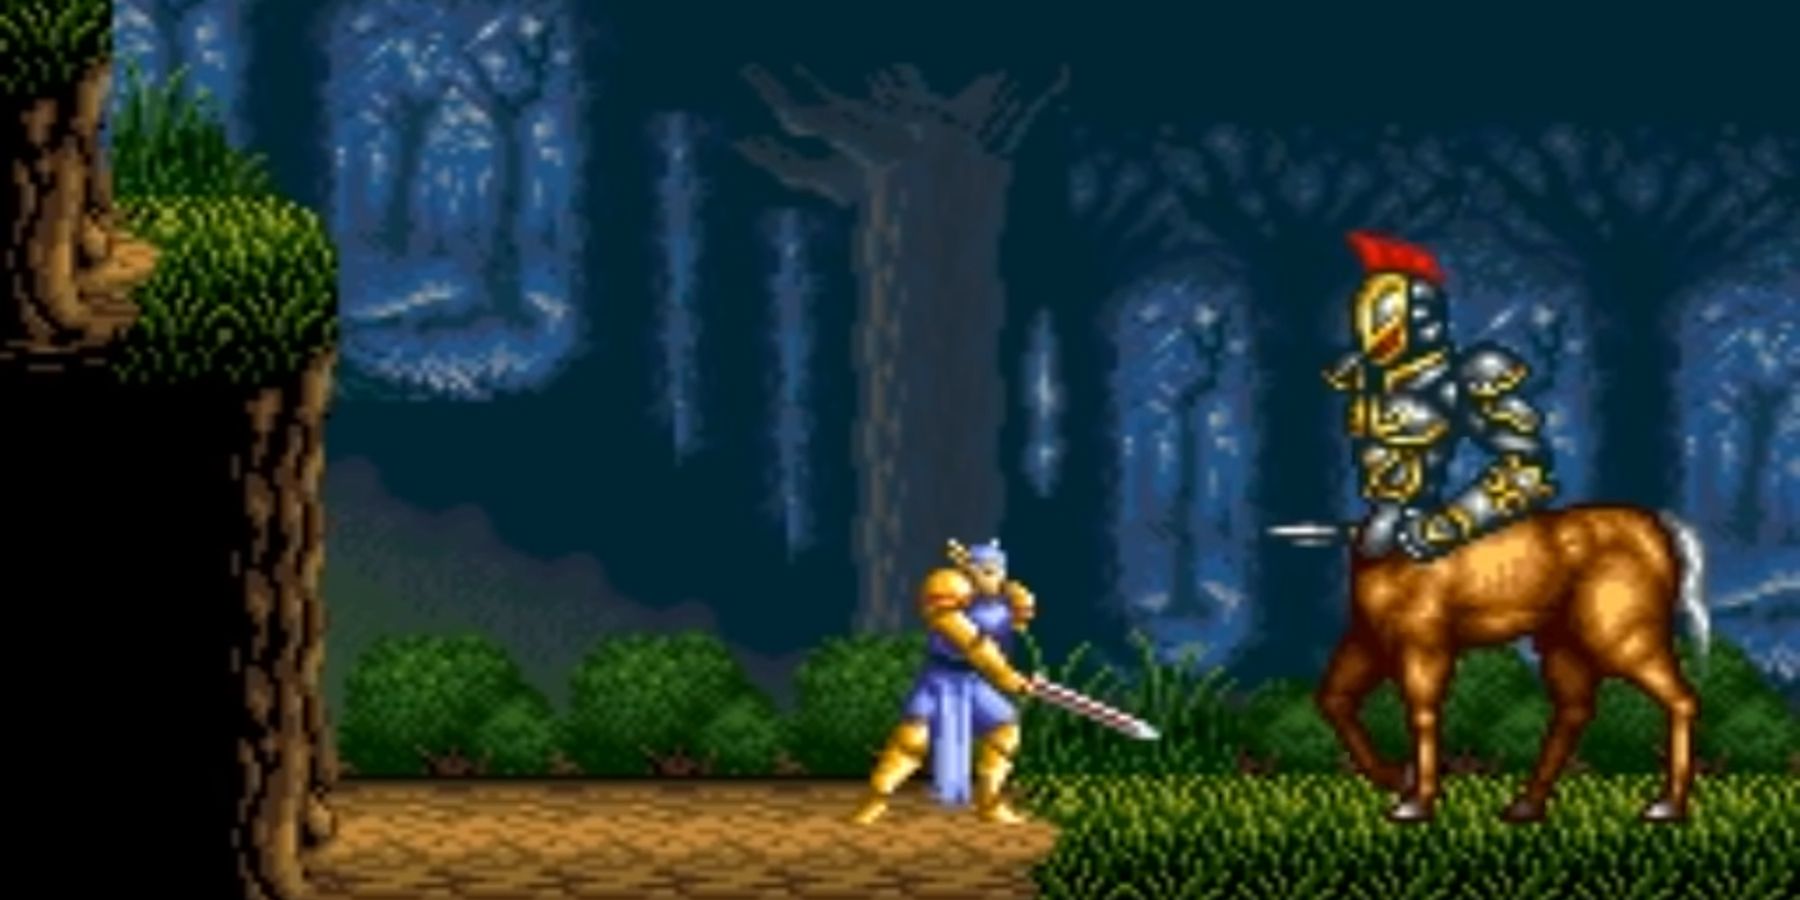 The statue of The Master battling the centaur boss in ActRaiser